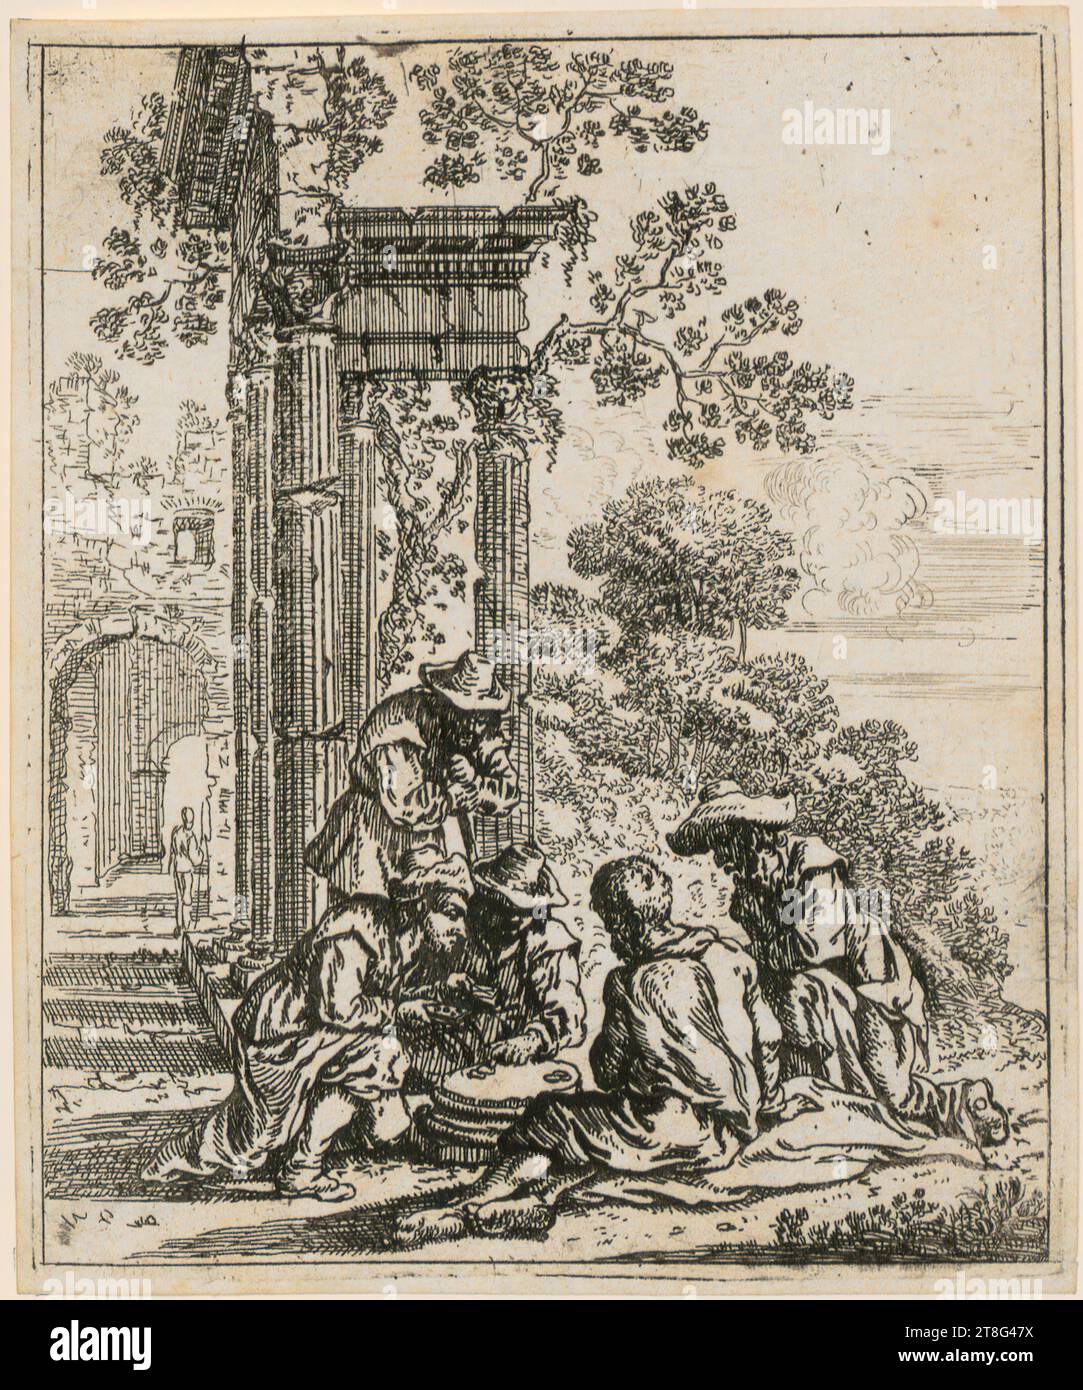 Frans Geffels (1625 - 1694), Card Player, sheet 2 of the series 'Landscapes with Ruins, Architectural Depictions and Figures', print medium: circa 1659 - 1671, etching, sheet size: 15.5 x 12.8 cm Stock Photo